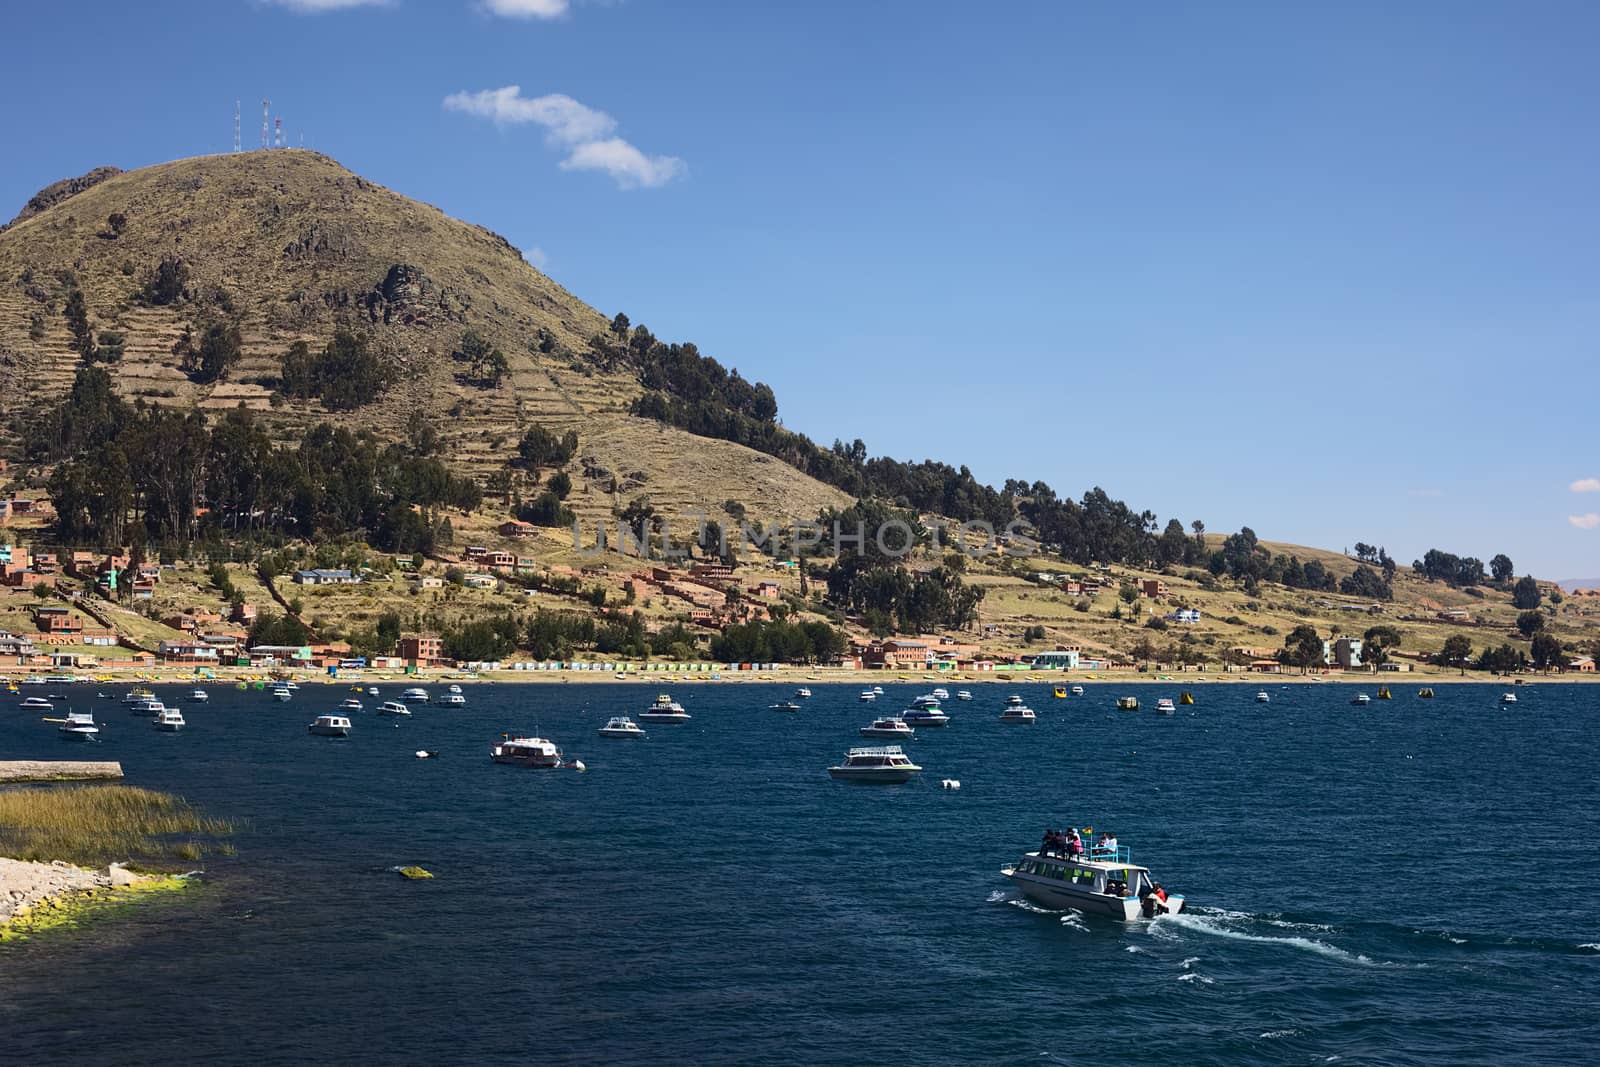 COPACABANA, BOLIVIA - OCTOBER 17, 2014: Tour boat entering the bay of the small tourist town on the shore of Lake Titicaca on October 17, 2014 in Copacabana, Bolivia. Copacabana is the starting and ending point for tours and transportation to Isla del Sol (Sun Island).